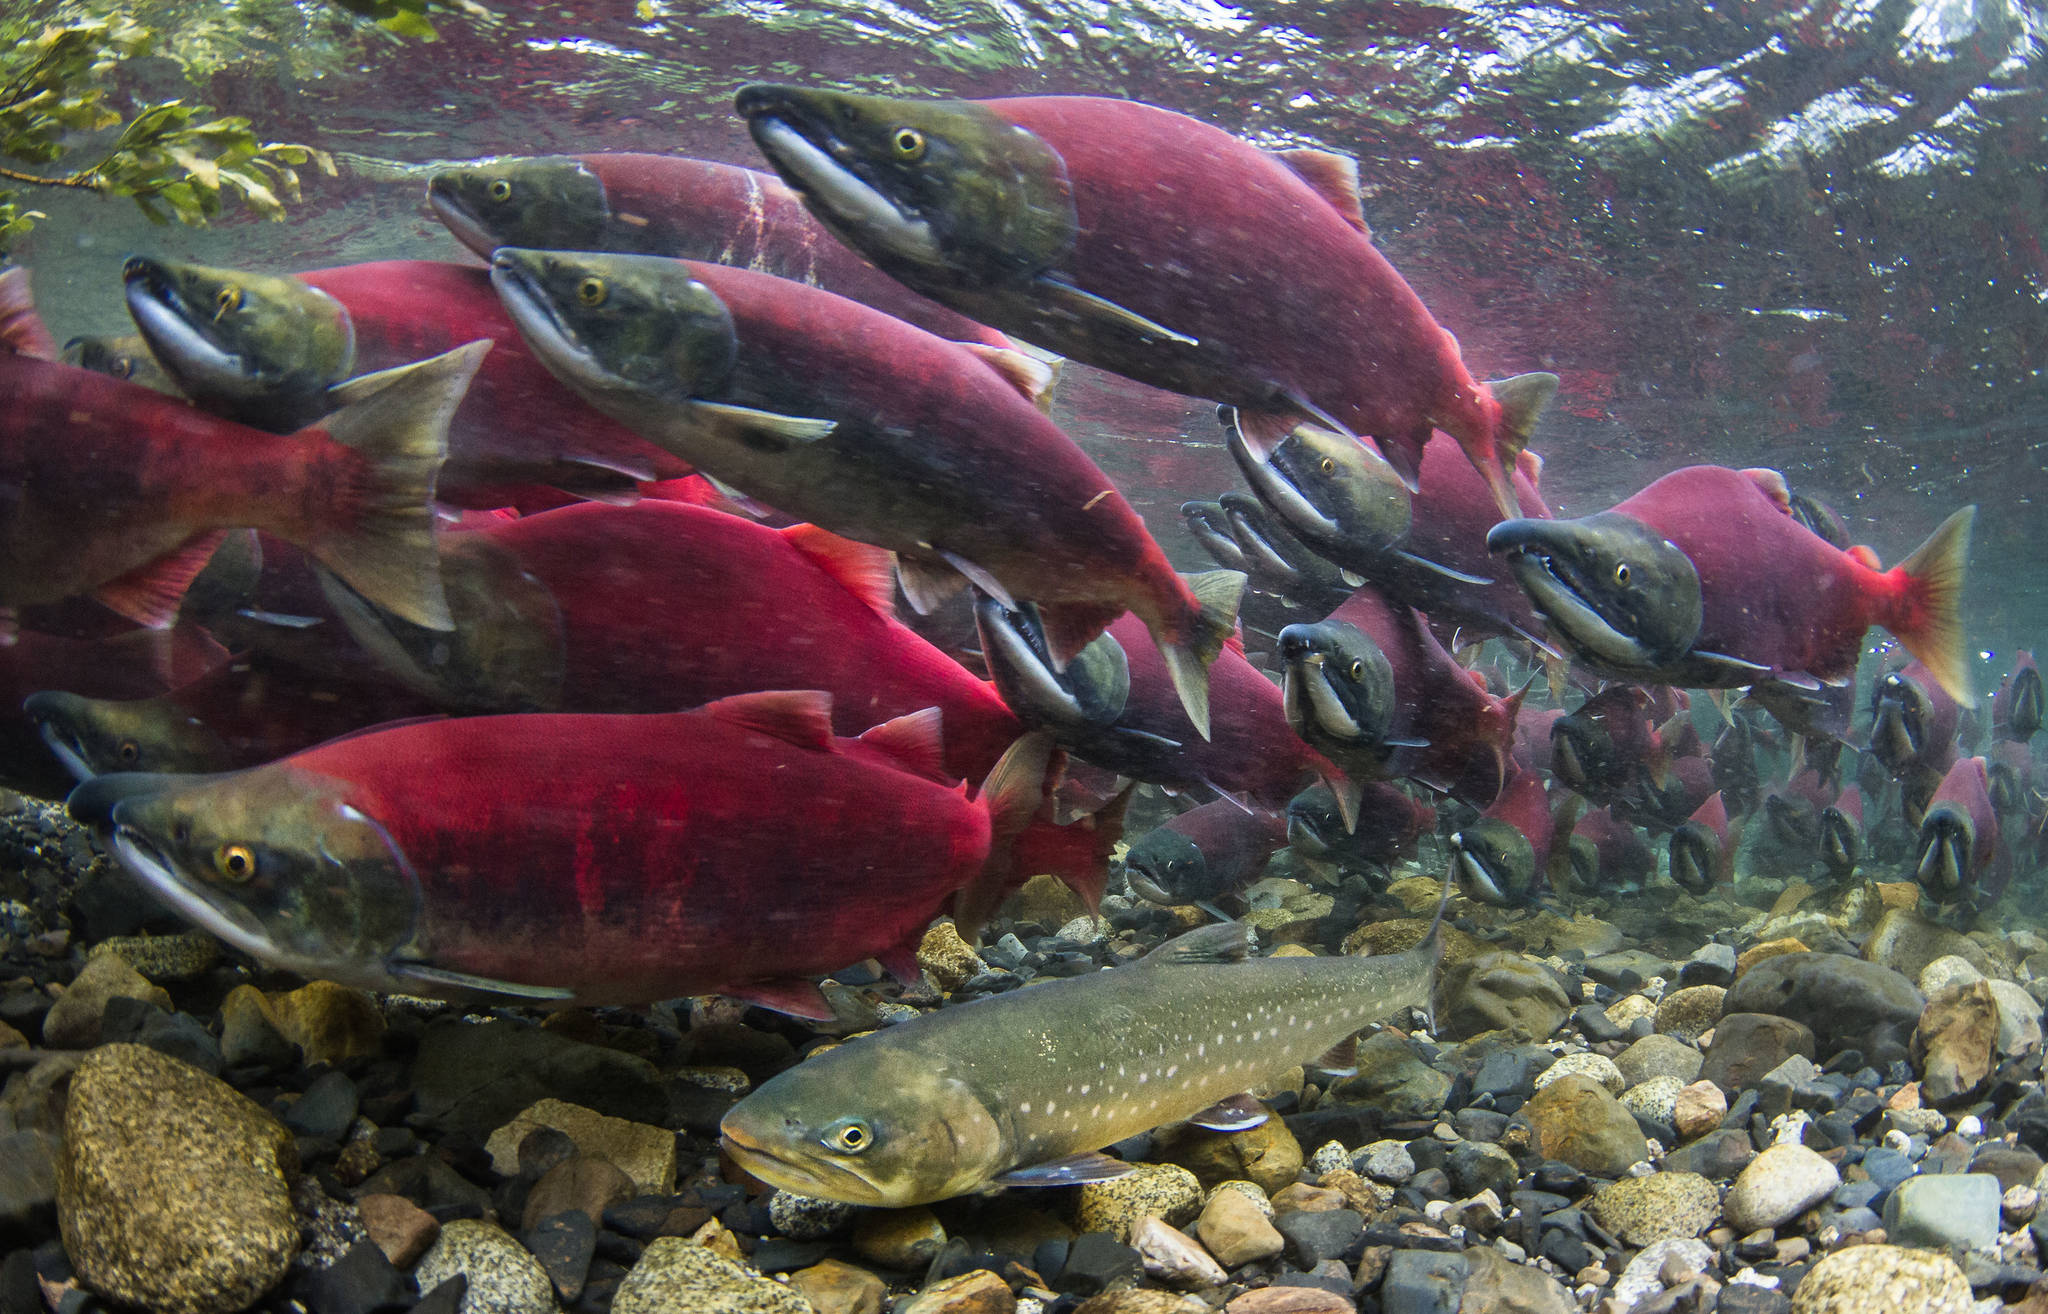 A char moves into Sam Creek along with hundreds of sockeye salmon. The char is skinny now, but will get fat gorging on salmon eggs. (Courtesy Photo | Jonny Armstrong)